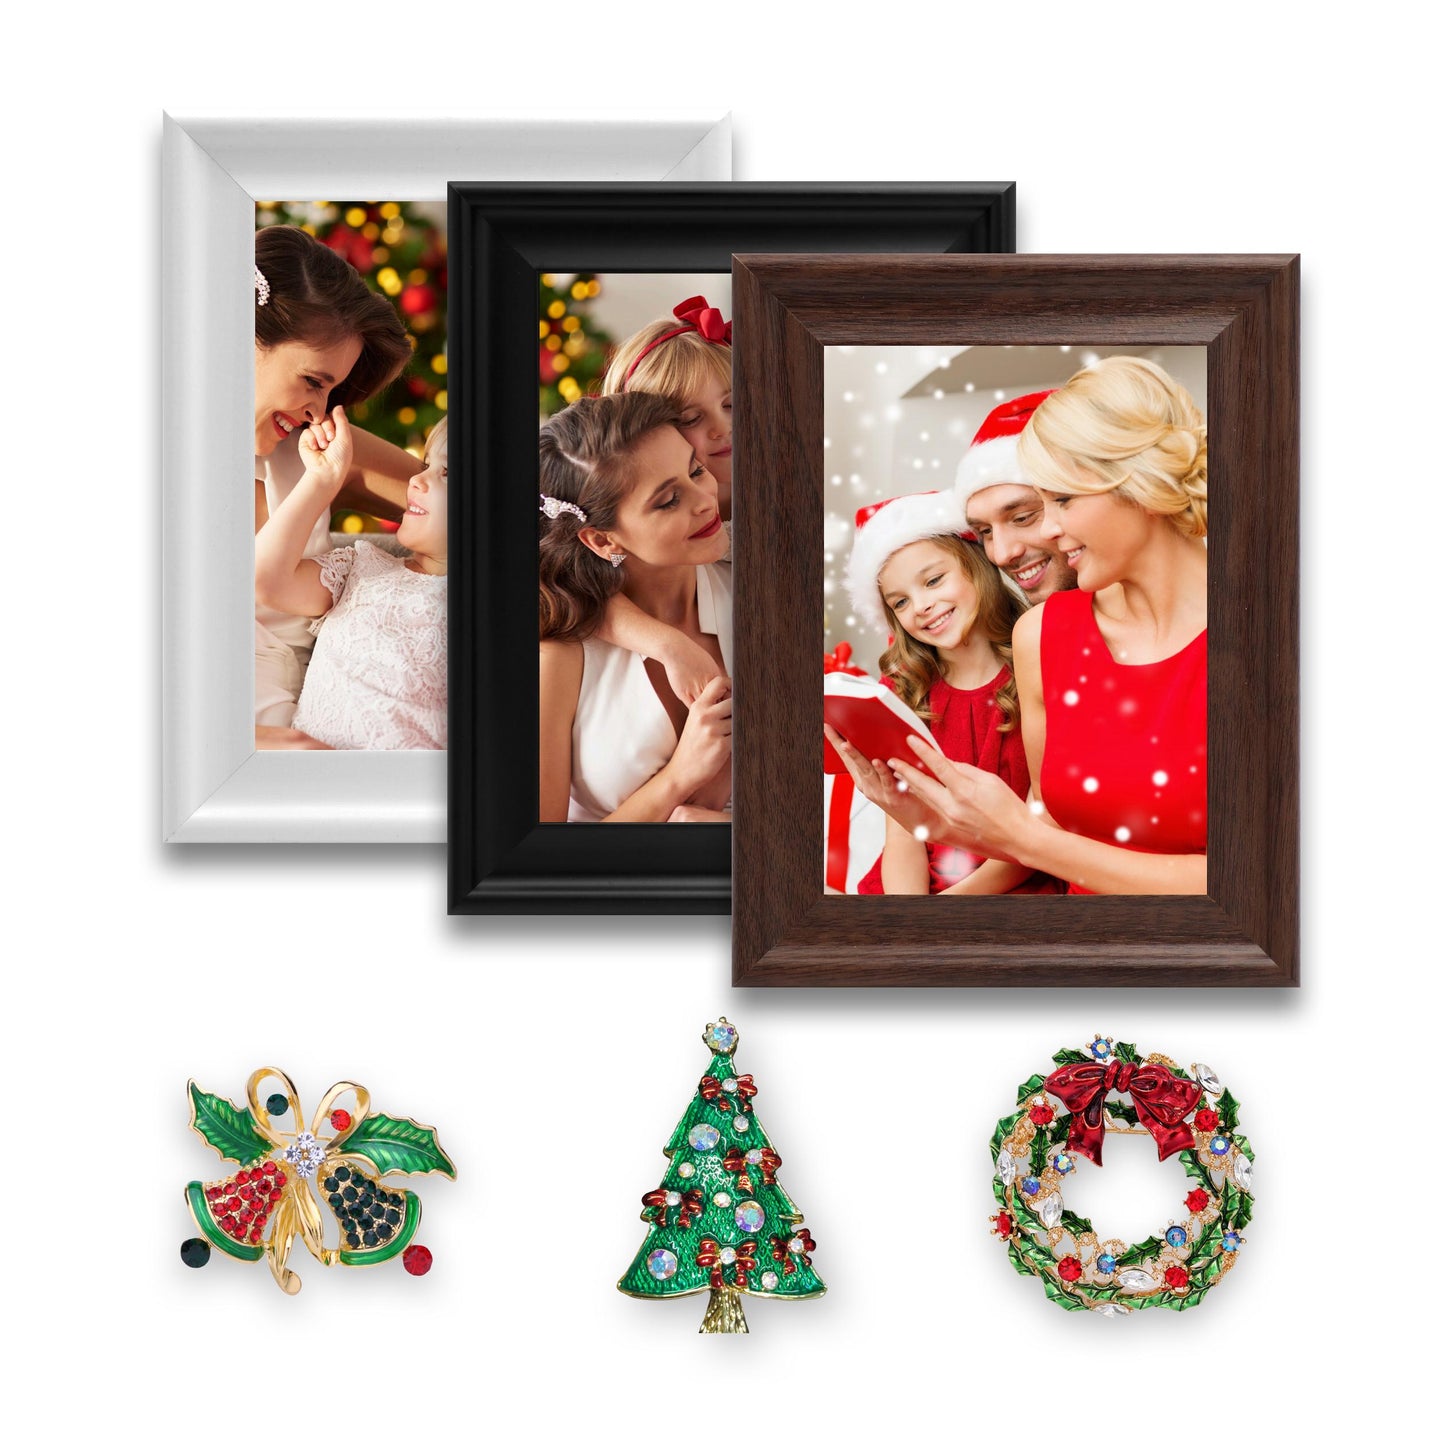 Christmas Picture Frame Photo Frame Embellished Gift for Wall and Tabletop Display (5x7, 5x7 and 5x7, Black, White and Brown)